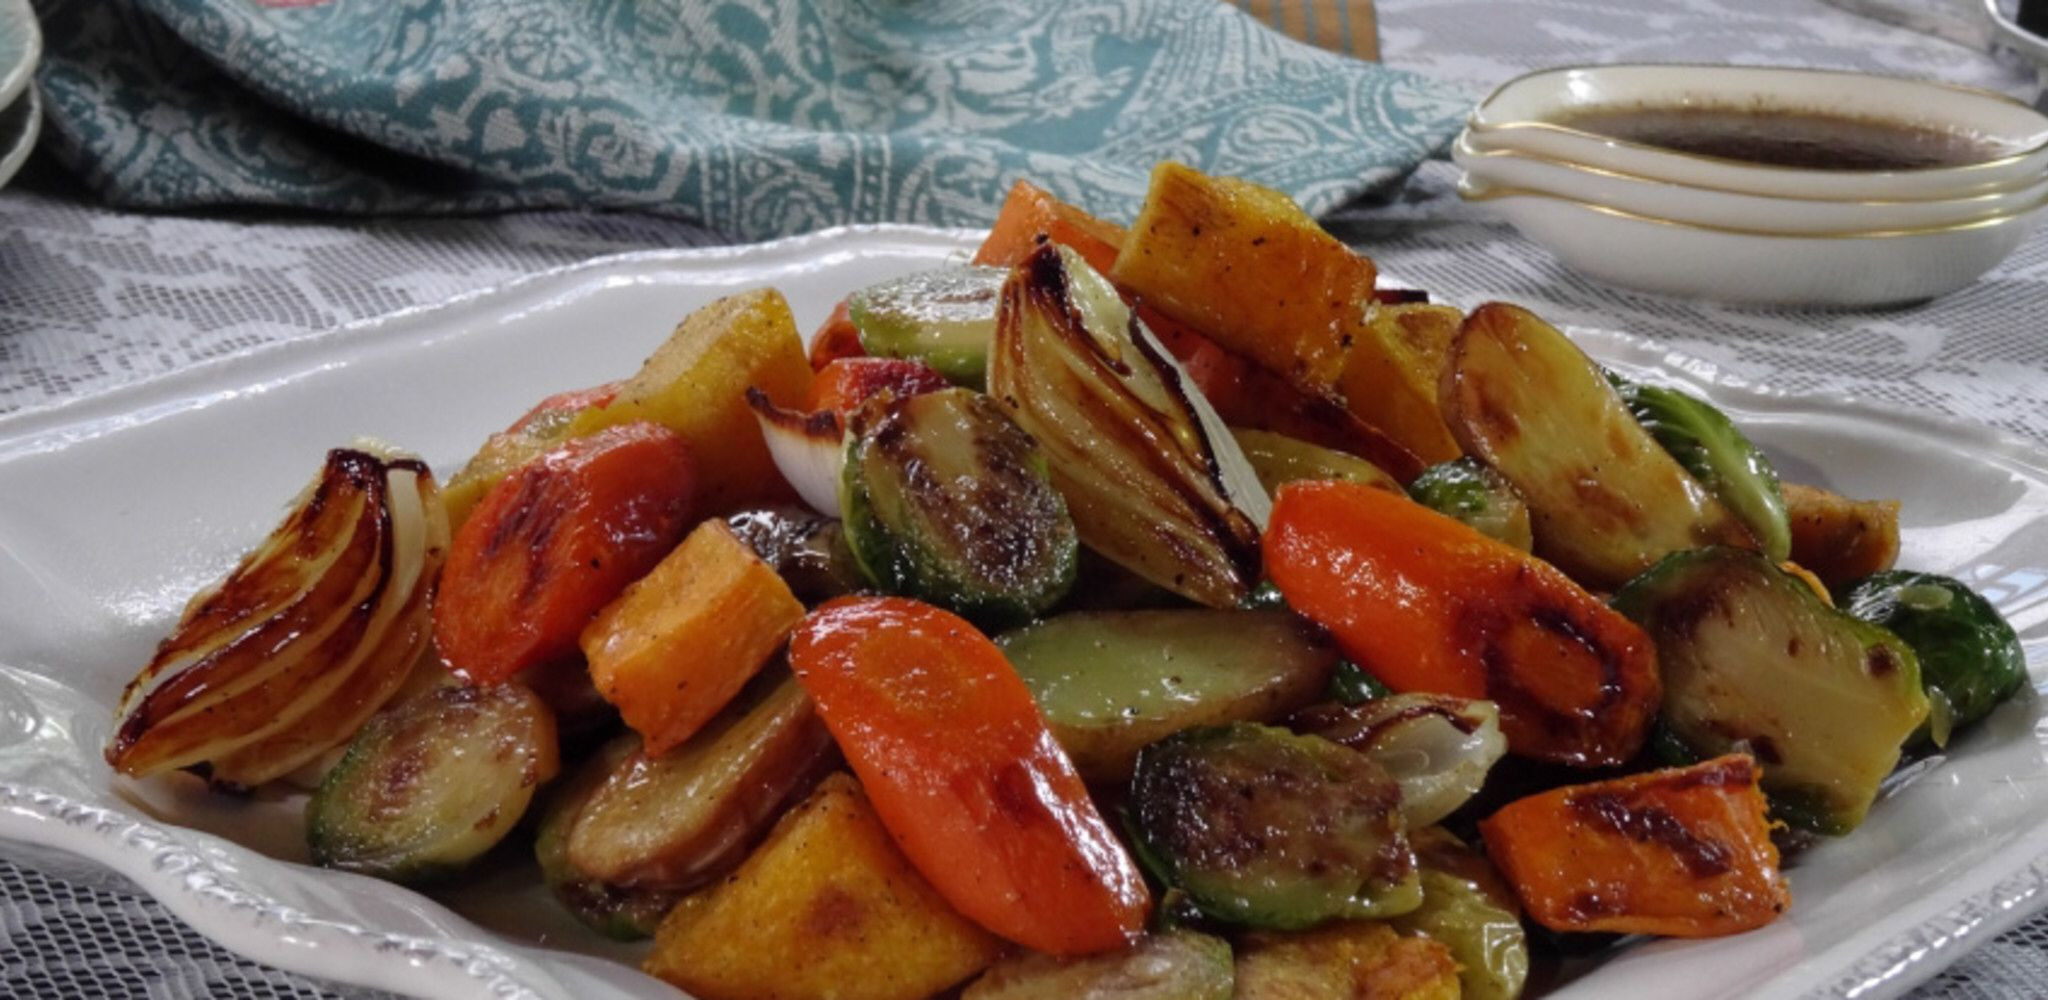 Roasted Vegetables With Balsamic Glaze
 Roasted Ve ables with Balsamic Glaze Recipe